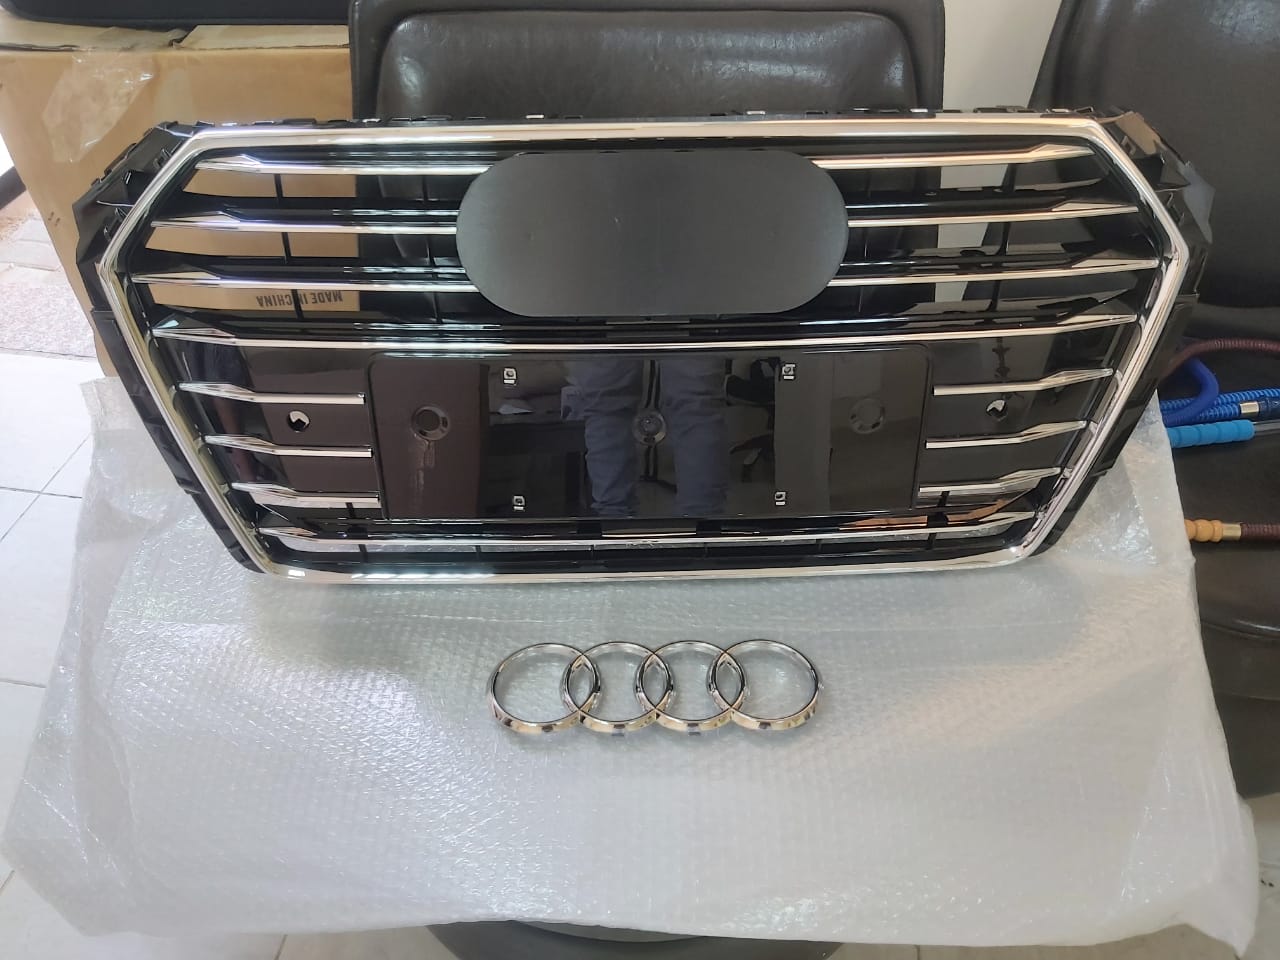 AUDI A4 2017 FRONT SHOW GRILL